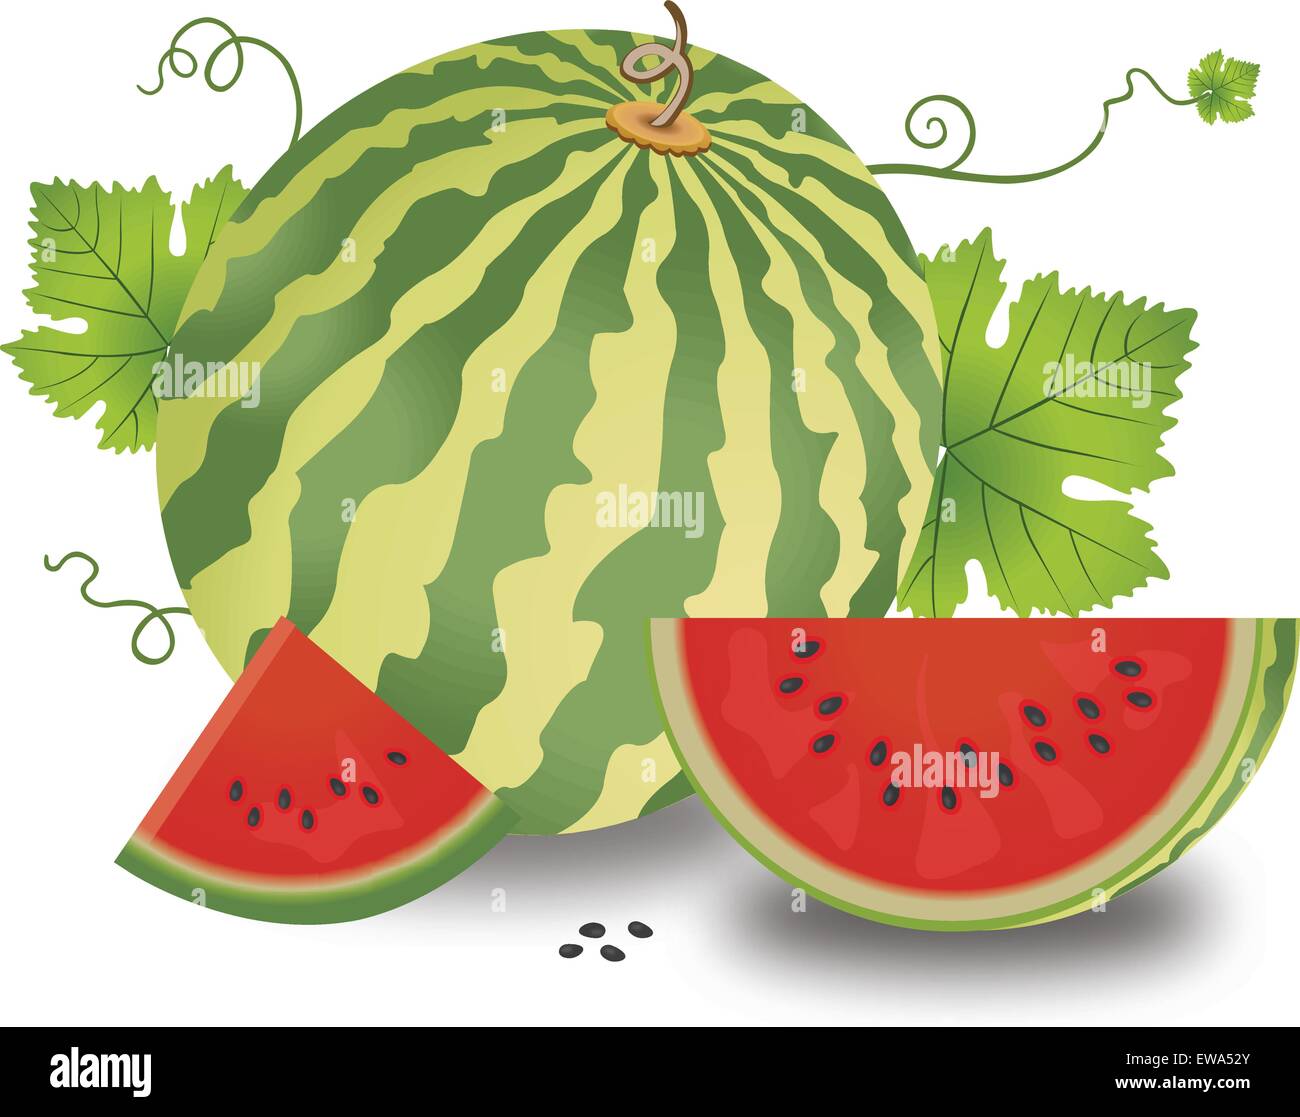 Watermelon, Fruit, Whole and Sliced, with Leaves and Vines, Seeds, vector illustration Stock Vector